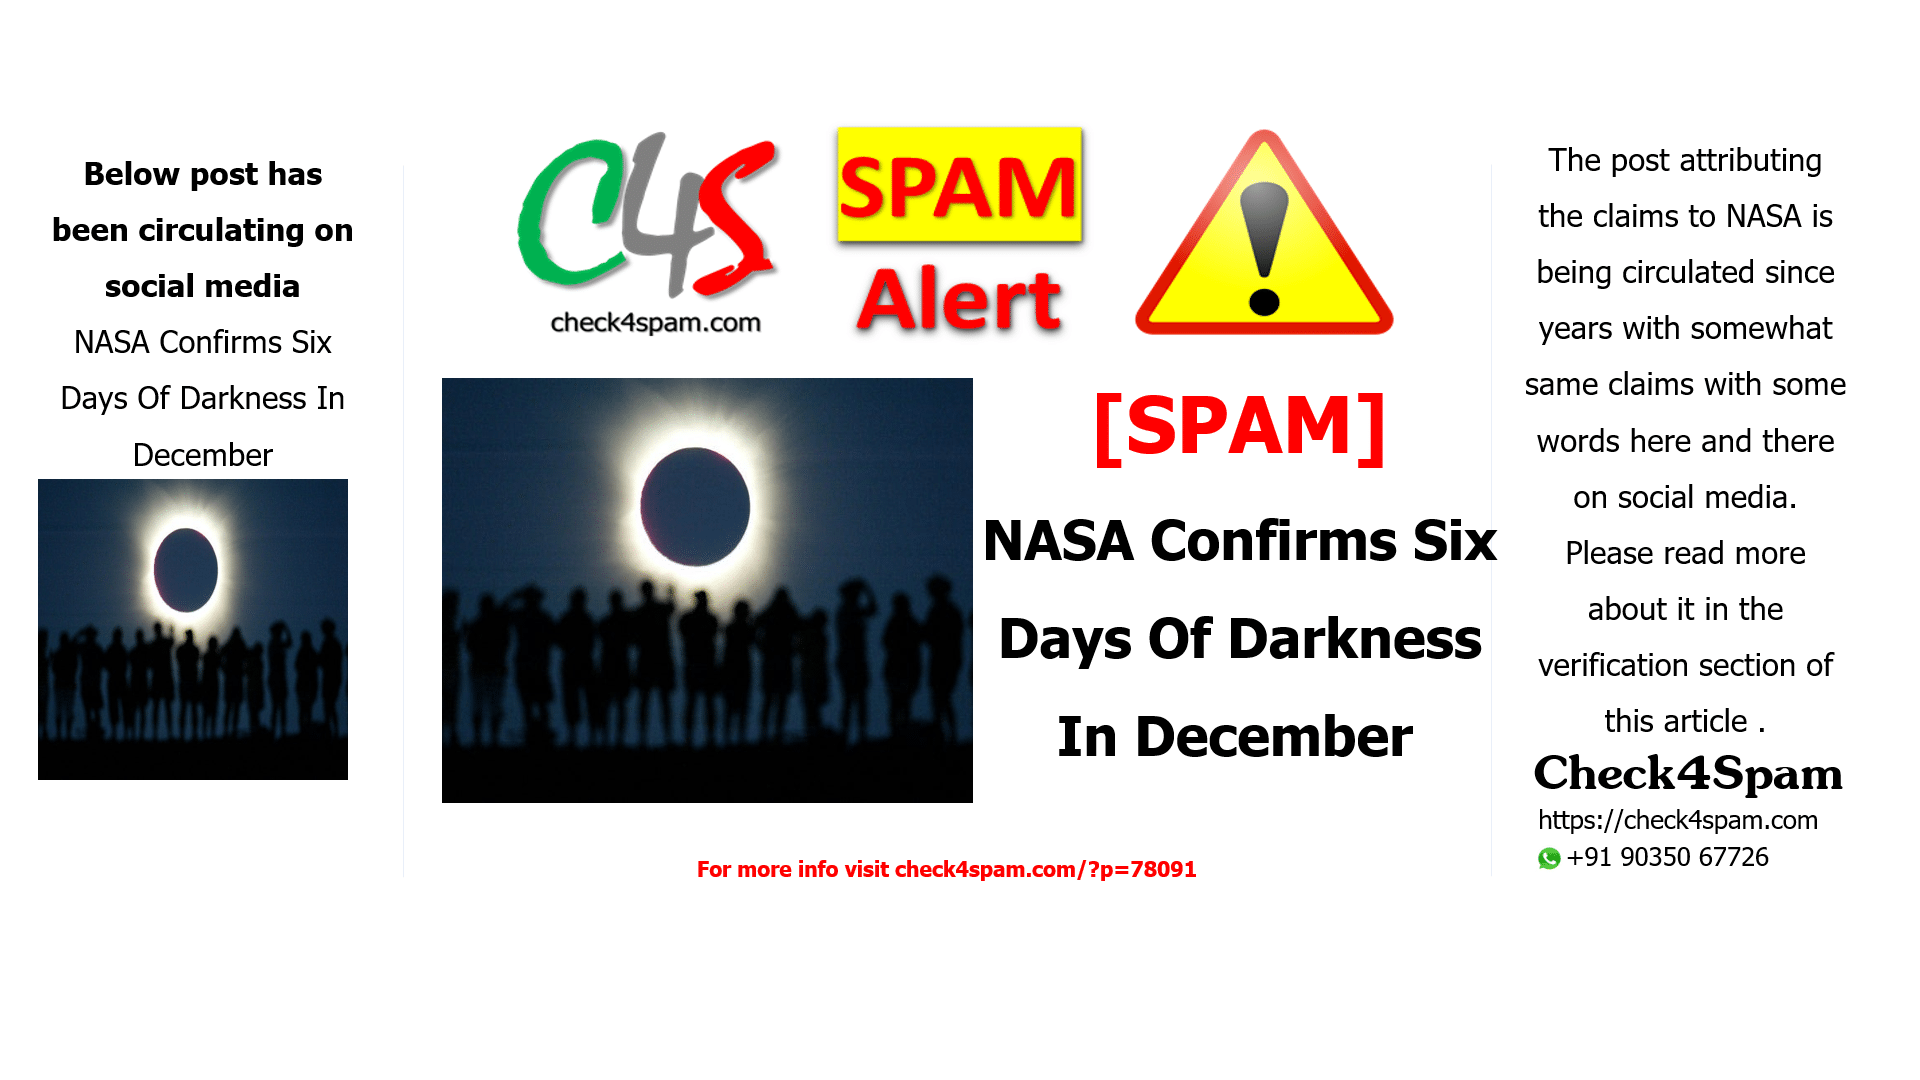 NASA Confirms Six Days Of Darkness In December